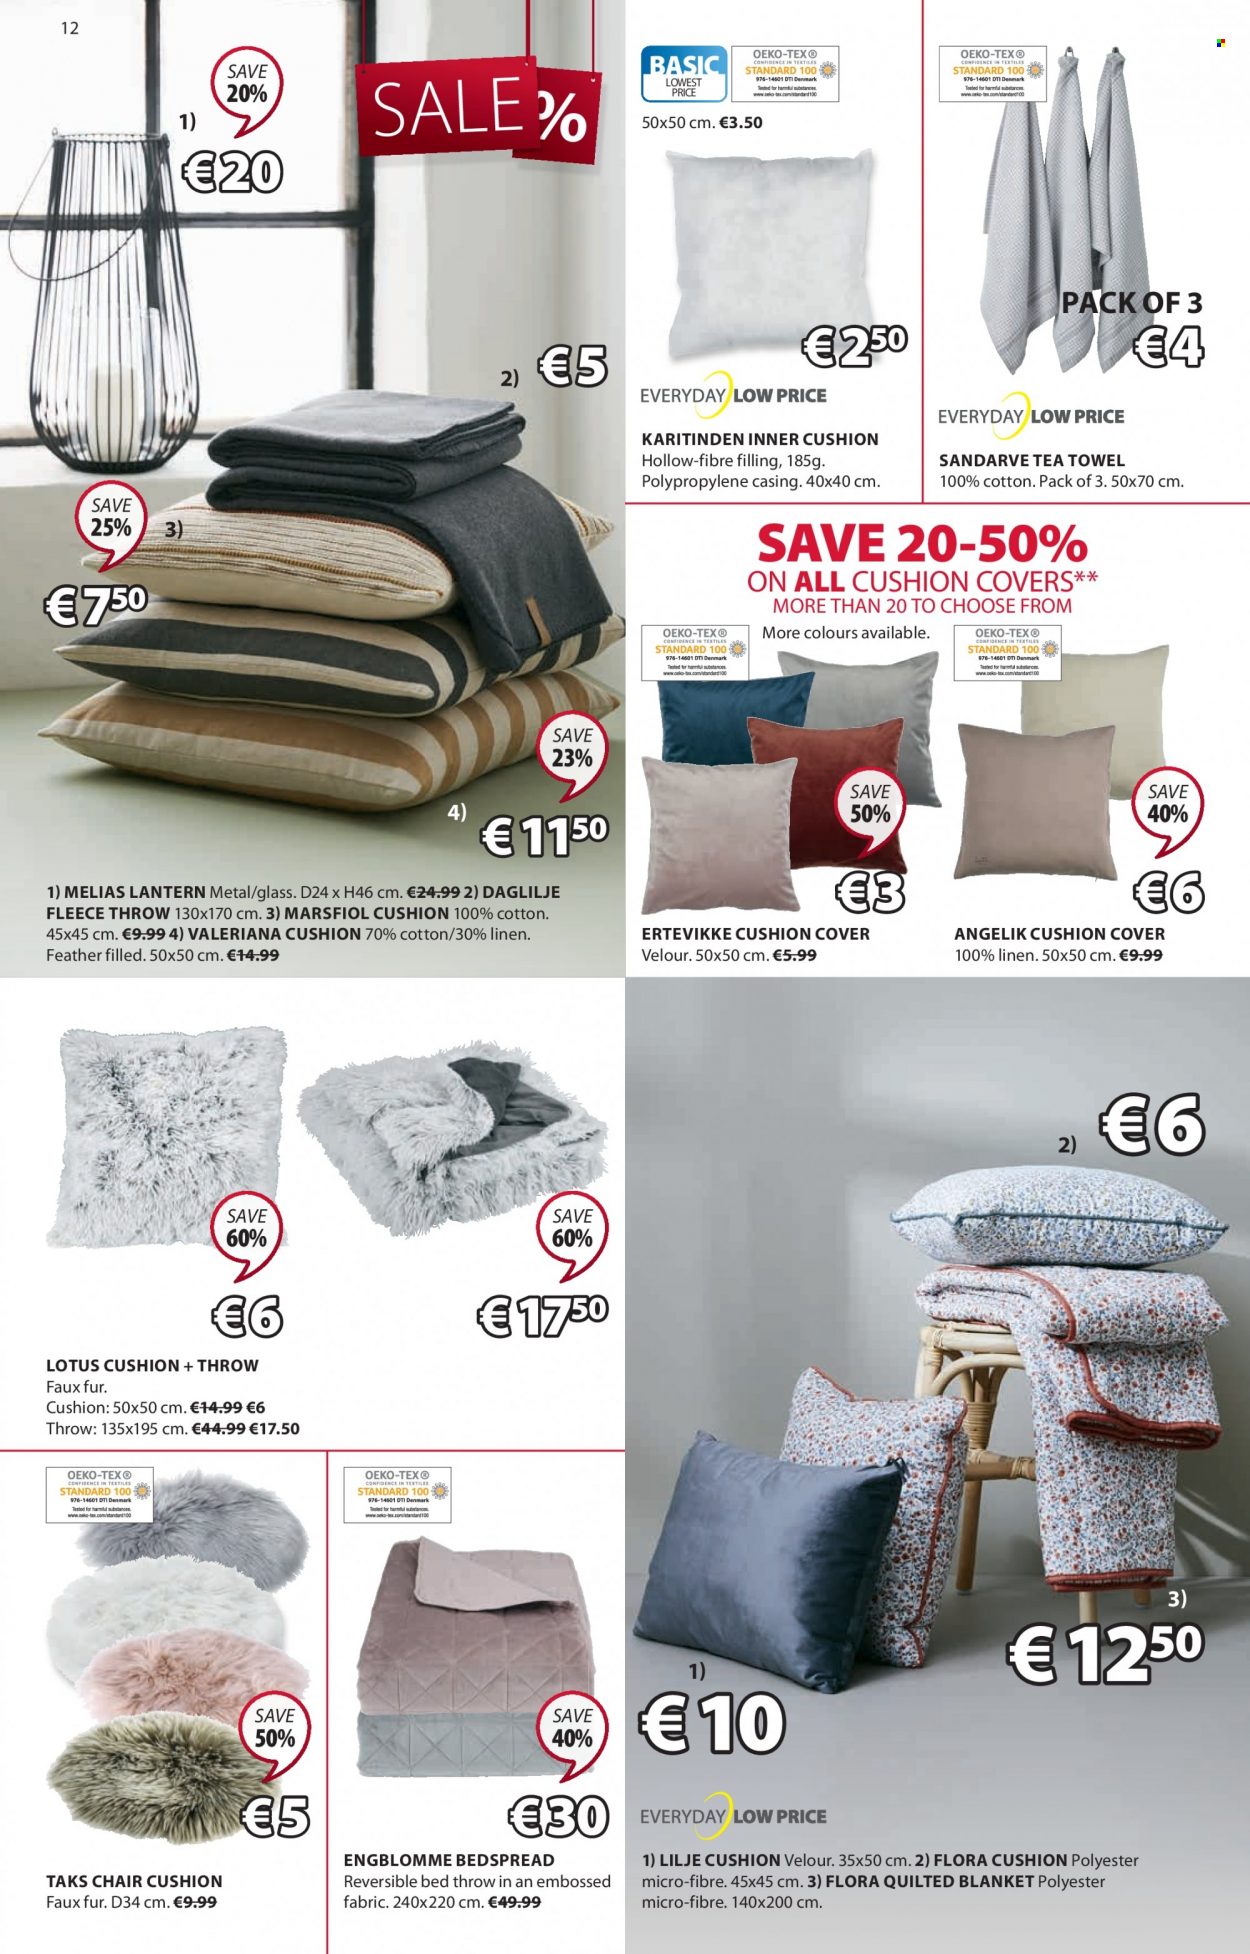 thumbnail - JYSK offer  - 06.01.2022 - 19.01.2022 - Sales products - chair, Lotus, cushion, lantern, tea towels, bedspread, blanket, linens, fleece throw. Page 12.